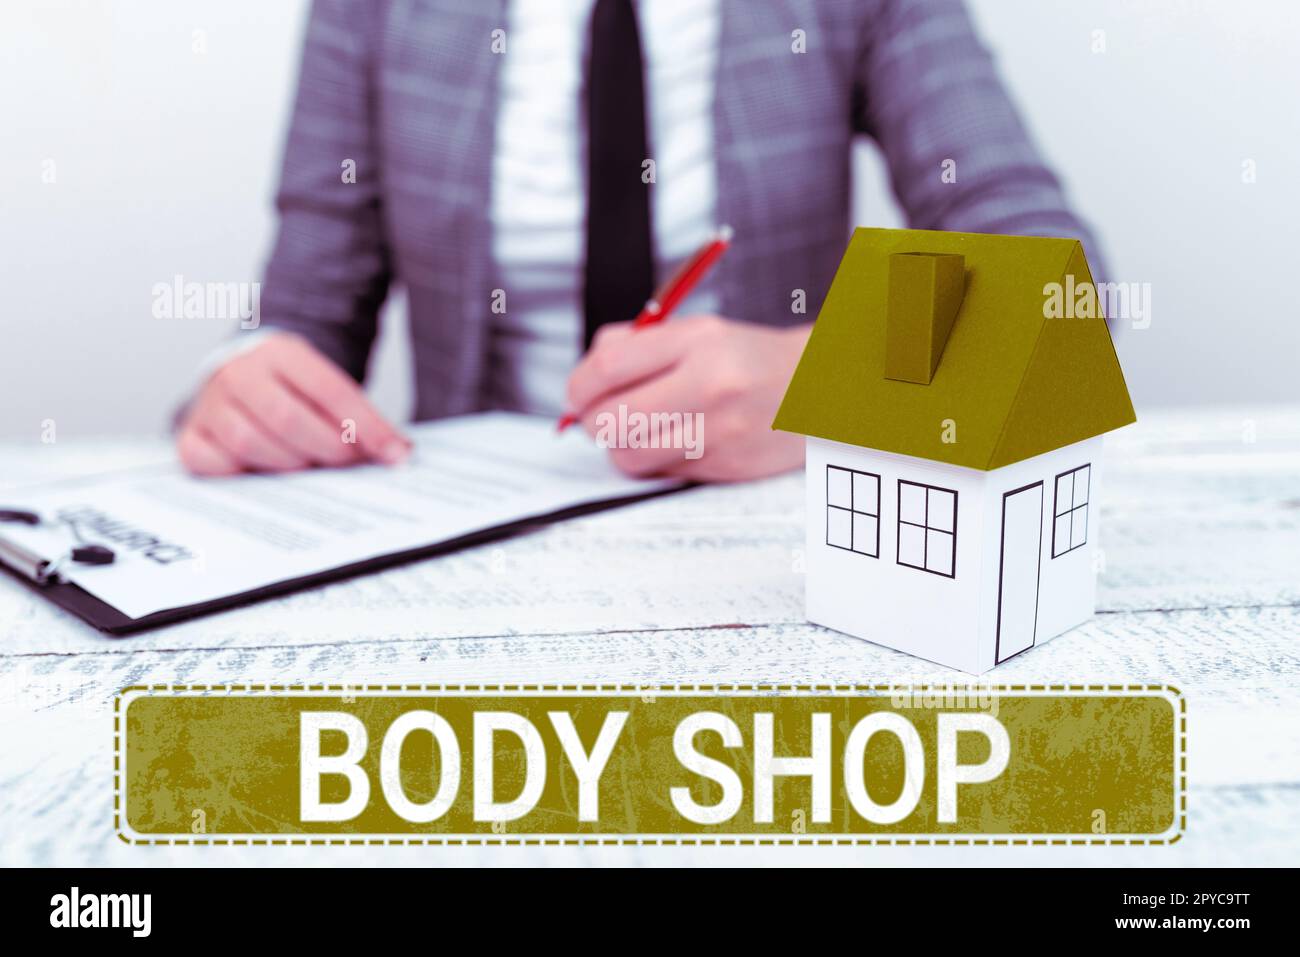 Inspiration showing sign Body Shop. Business approach a shop where automotive bodies are made or repaired Stock Photo